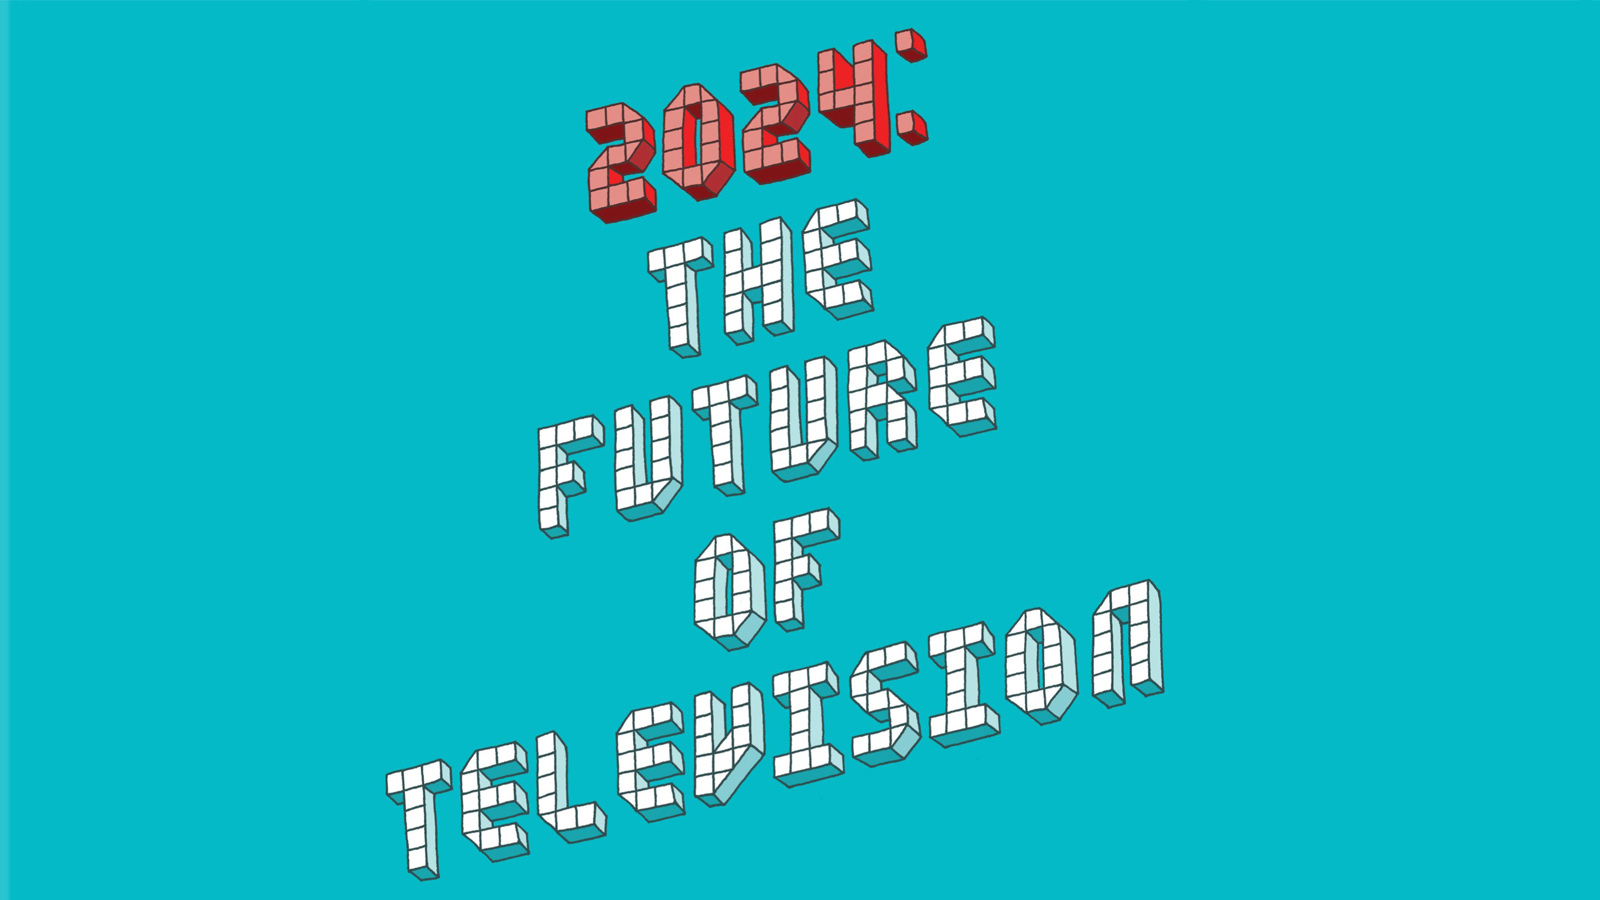 2024: The Future of Television | News | UKTV Corporate Site